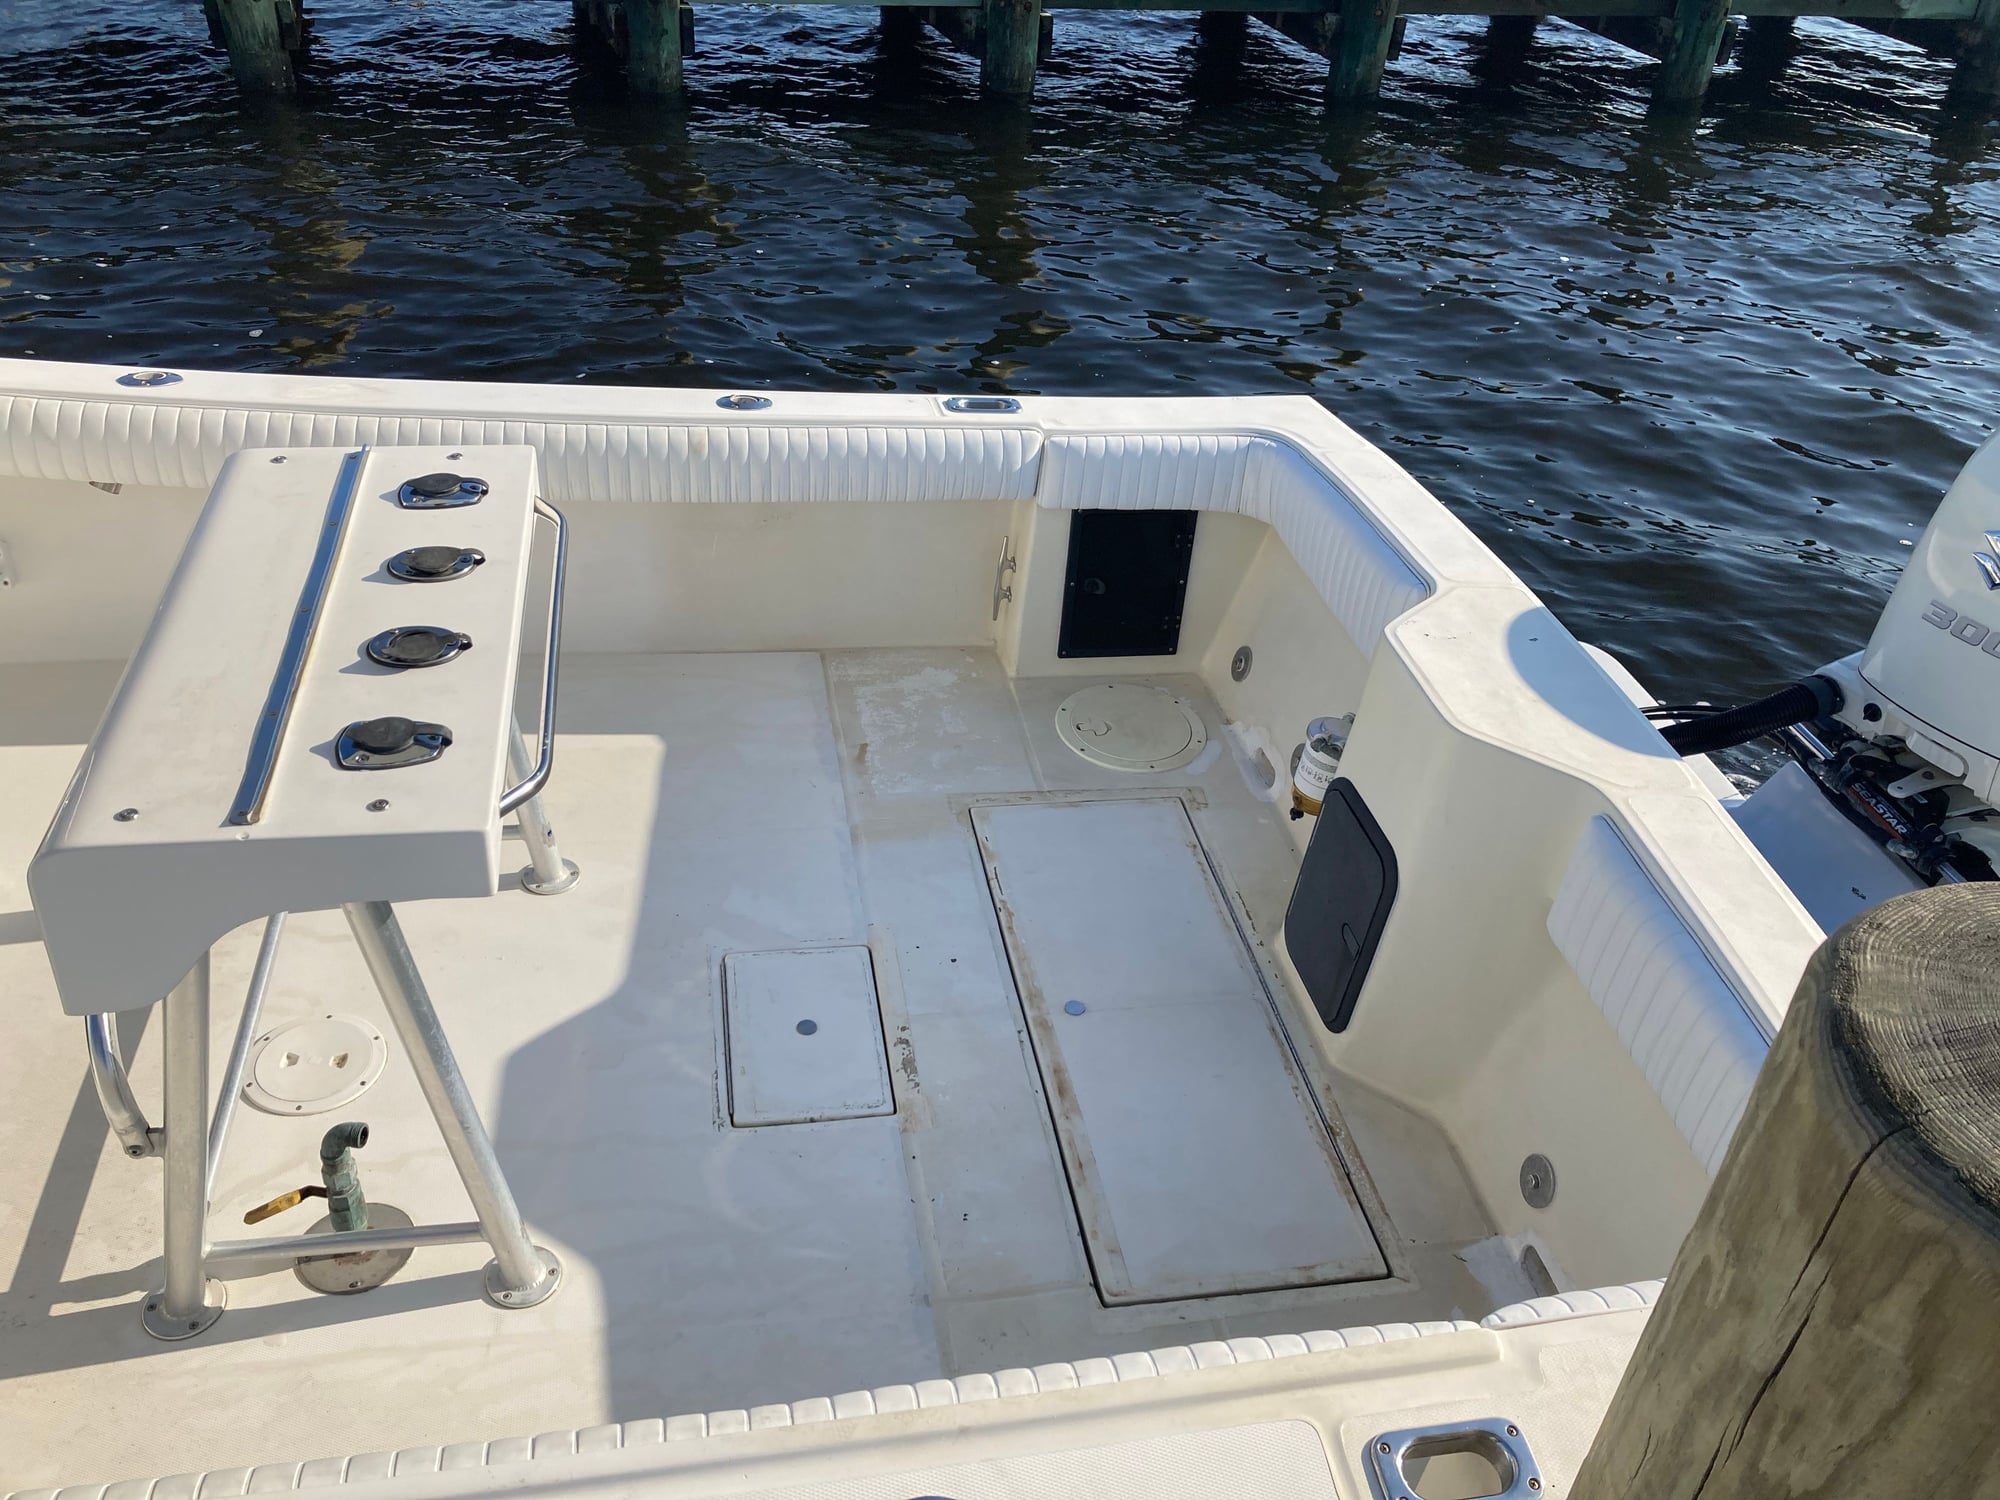 2000 Regulator 23 open for sale - The Hull Truth - Boating and Fishing Forum